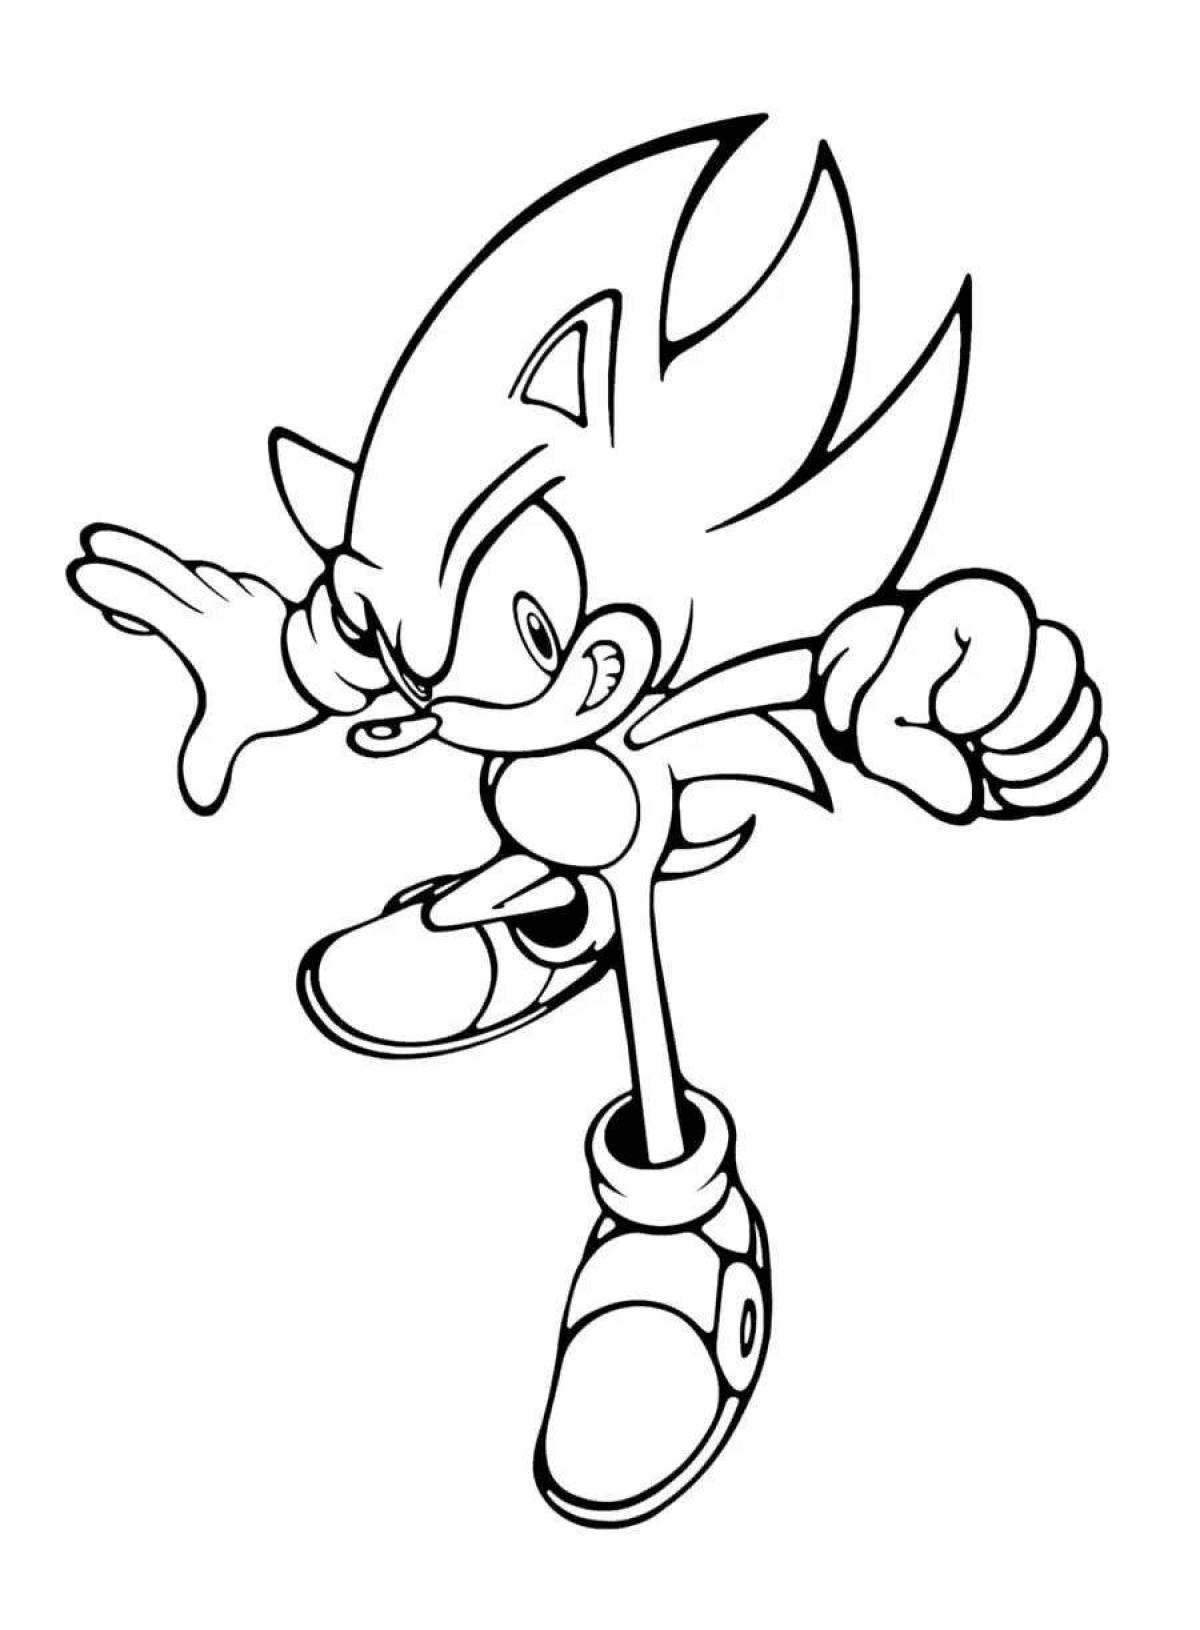 Colorful super hedgehog sonic coloring page